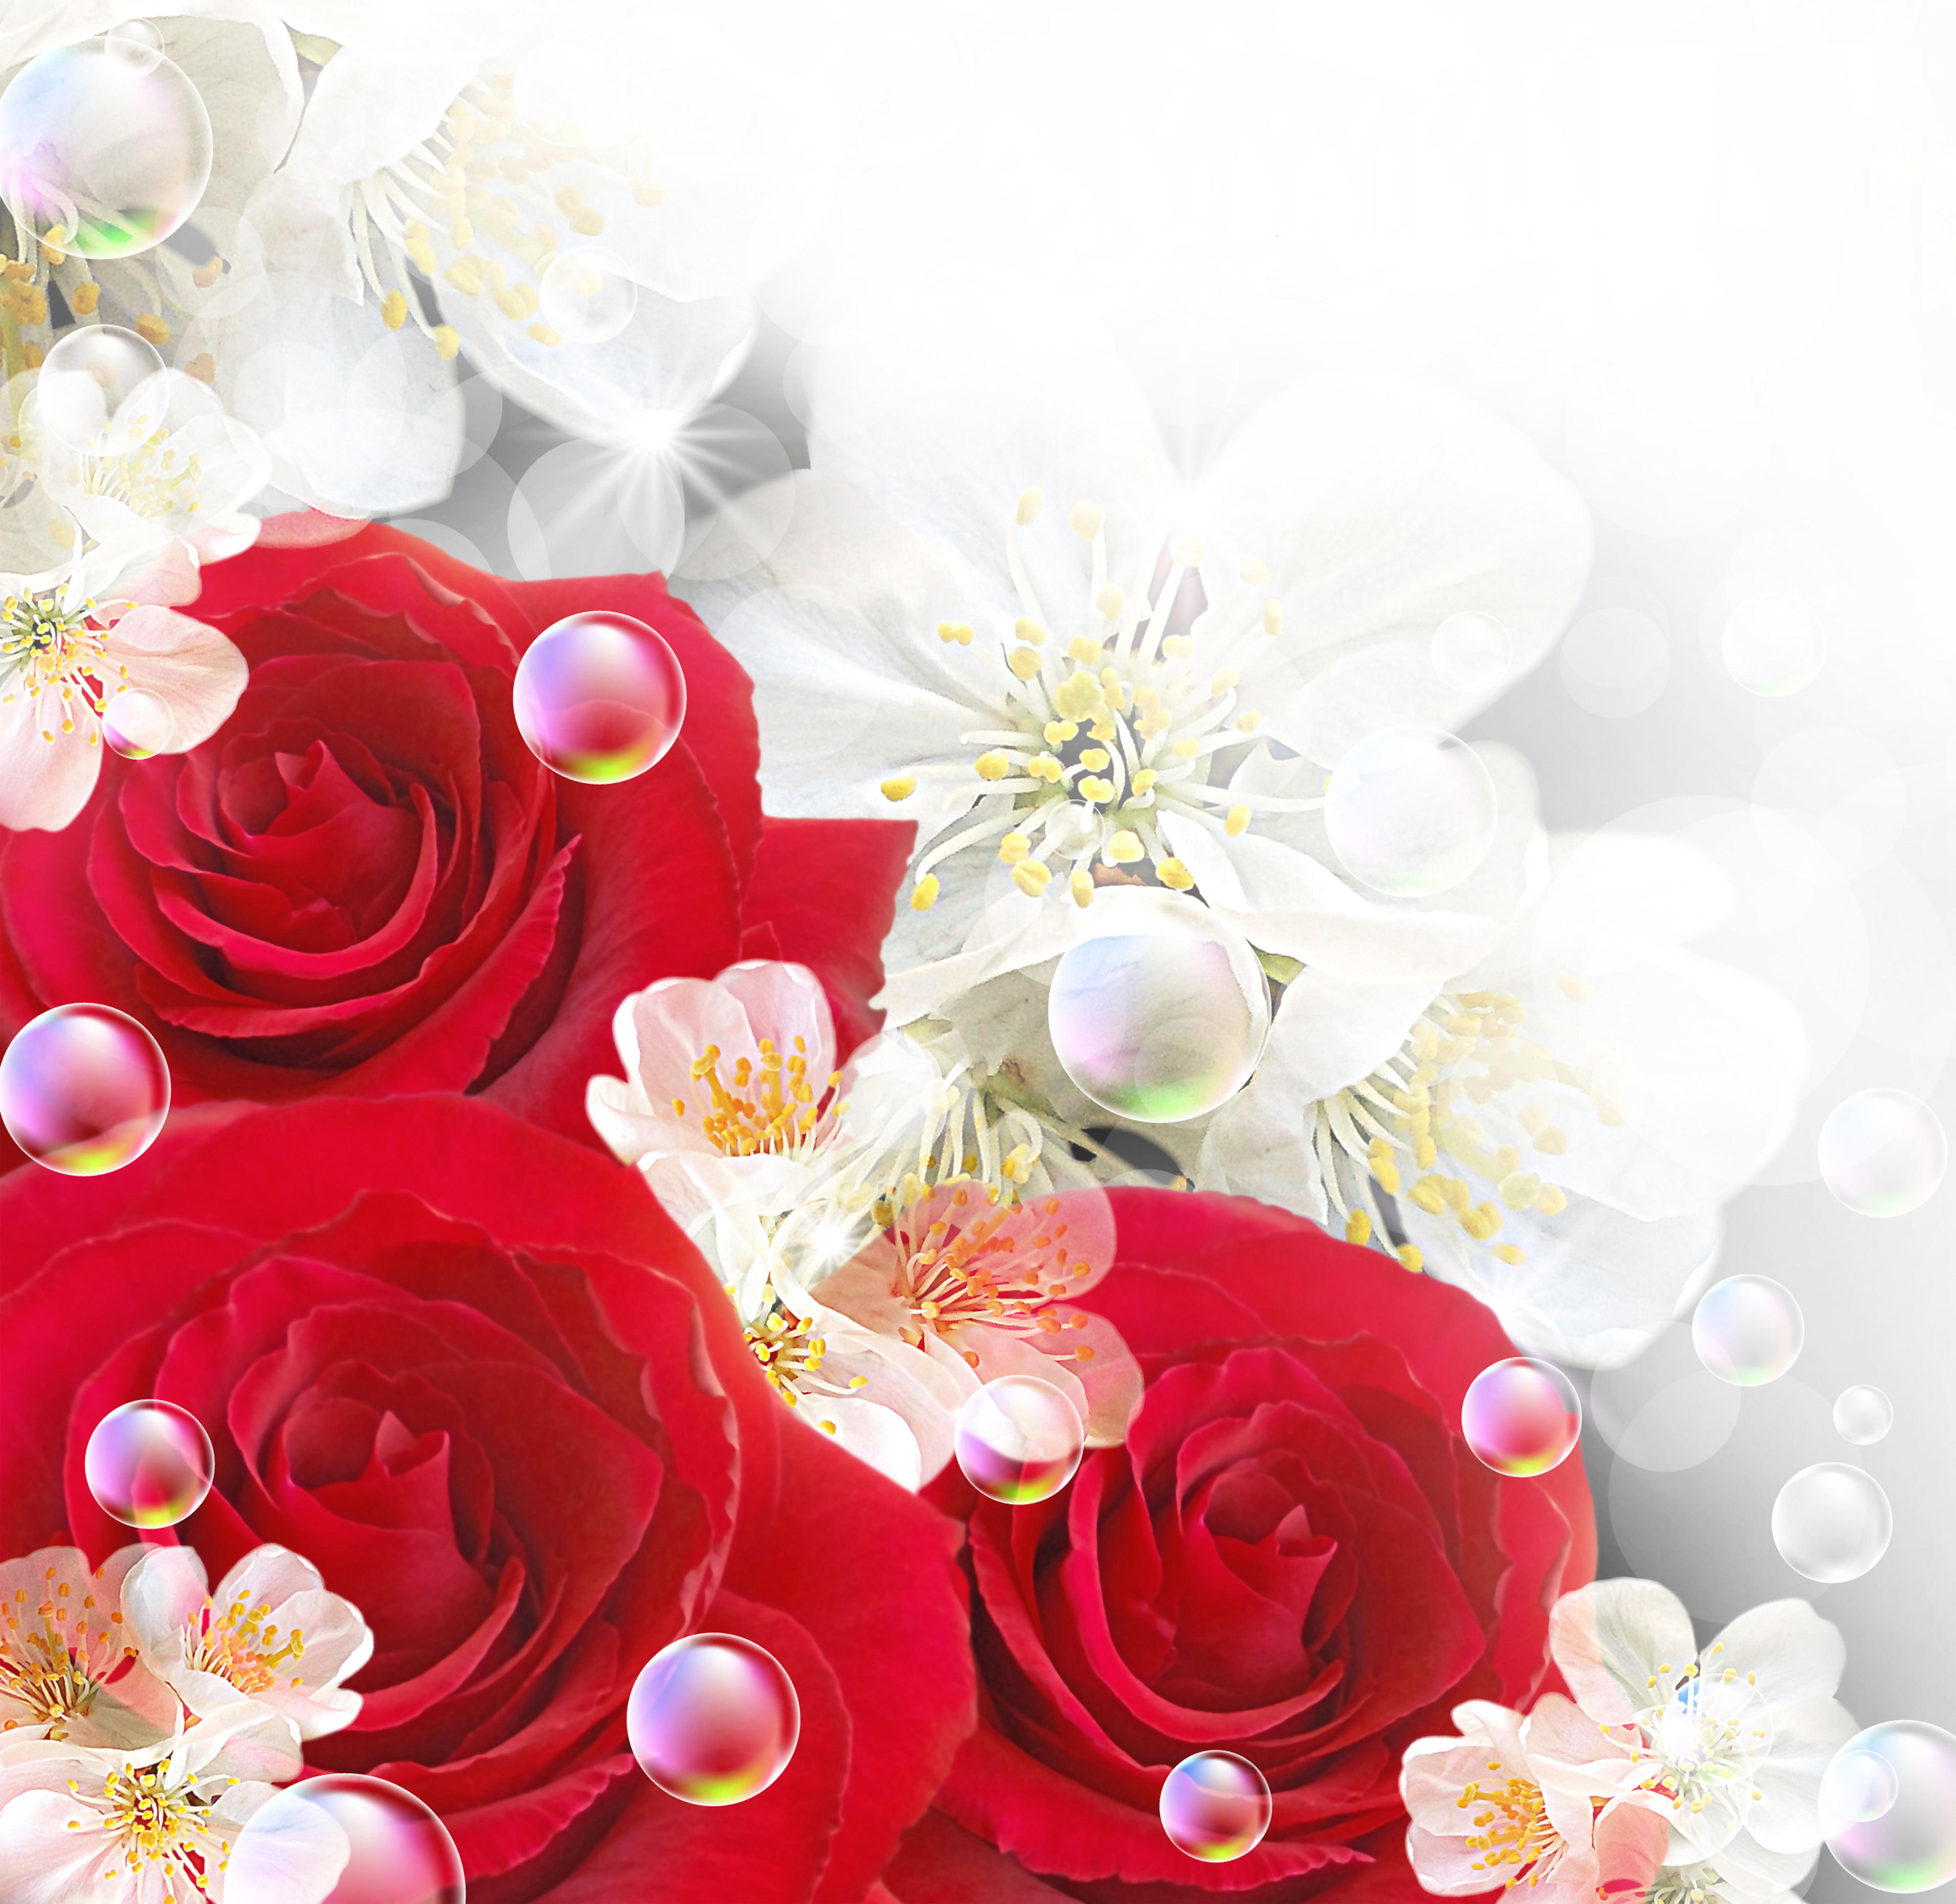 Red And White Rose Background Background with red